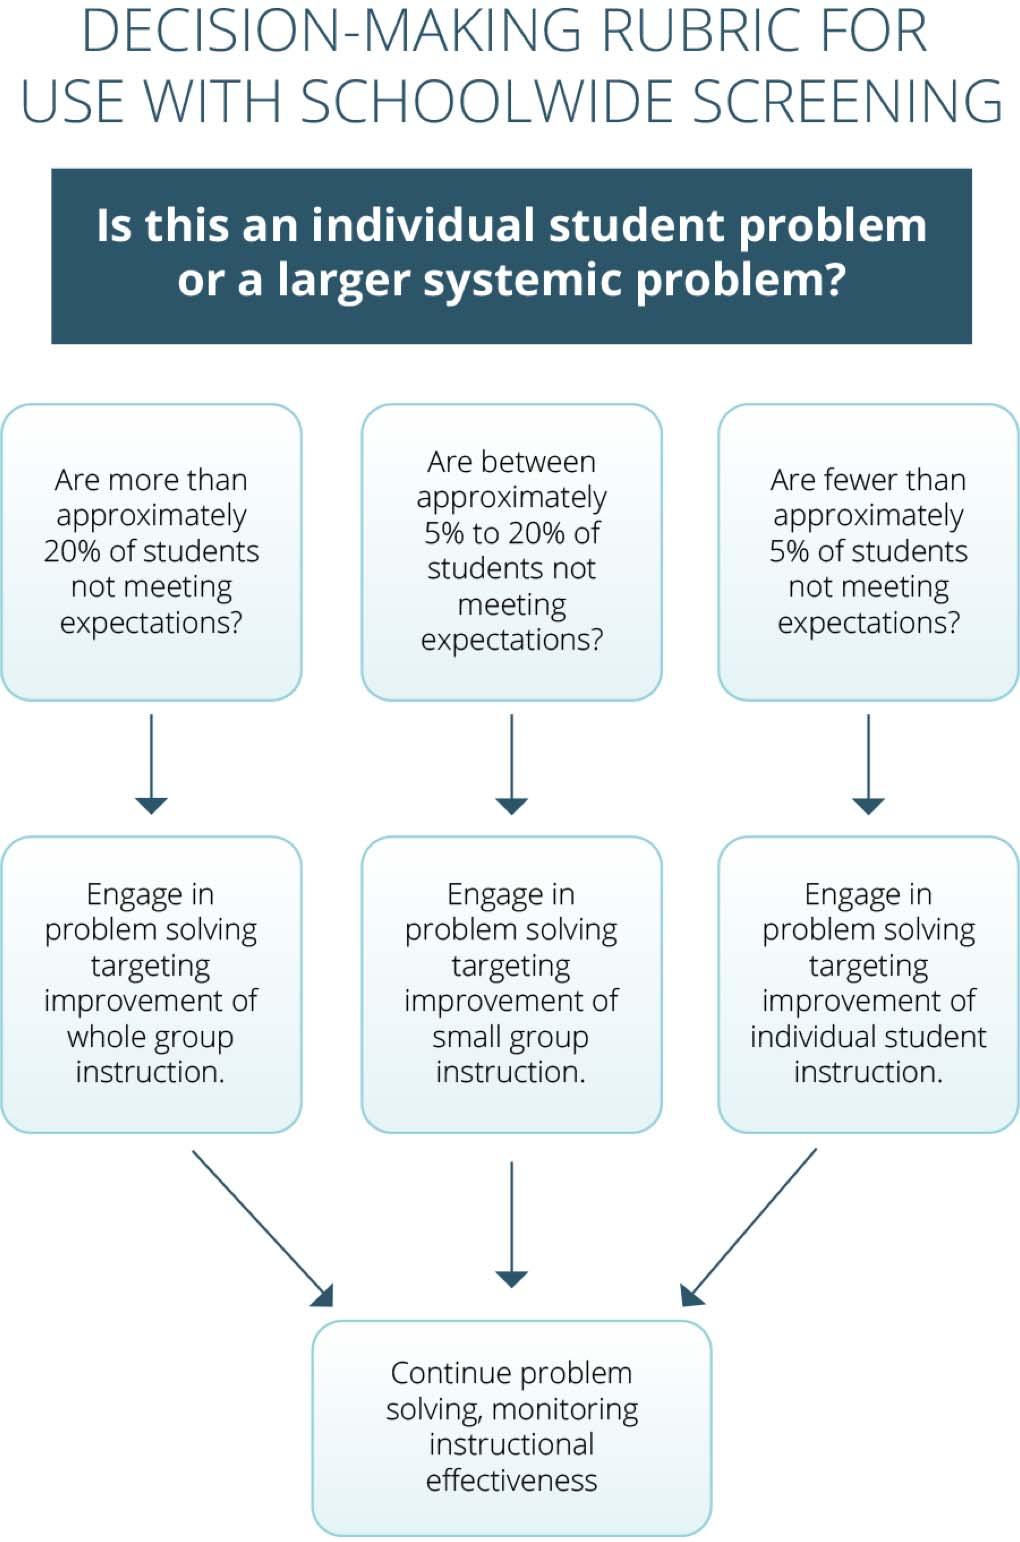 Guiding Tools for Instructional Problem Solving Revised (GTIPS-R) The Decision-Making Rubric for Use with Schoolwide Screening begins by asking the overarching question: Is this an individual student